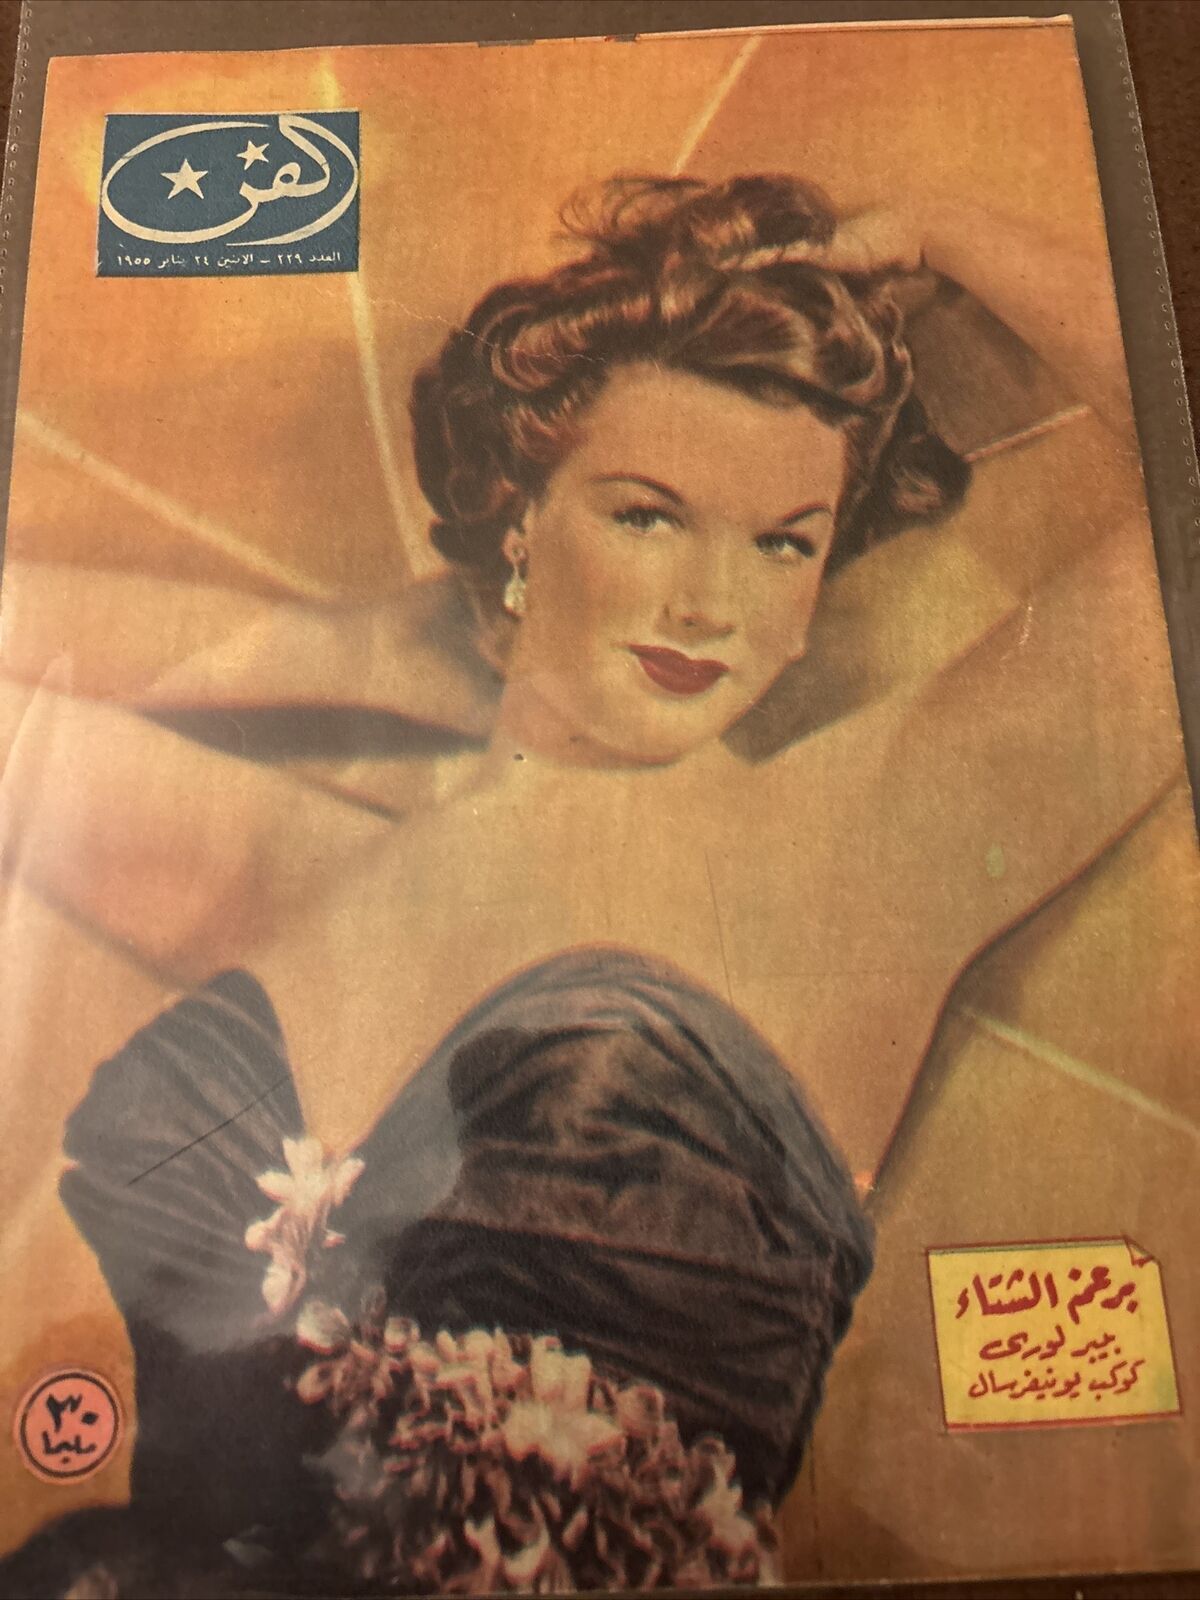 1955 Fan Magazine Actress Piper Laurie Cover Arabic Scarce Cover Great Cond